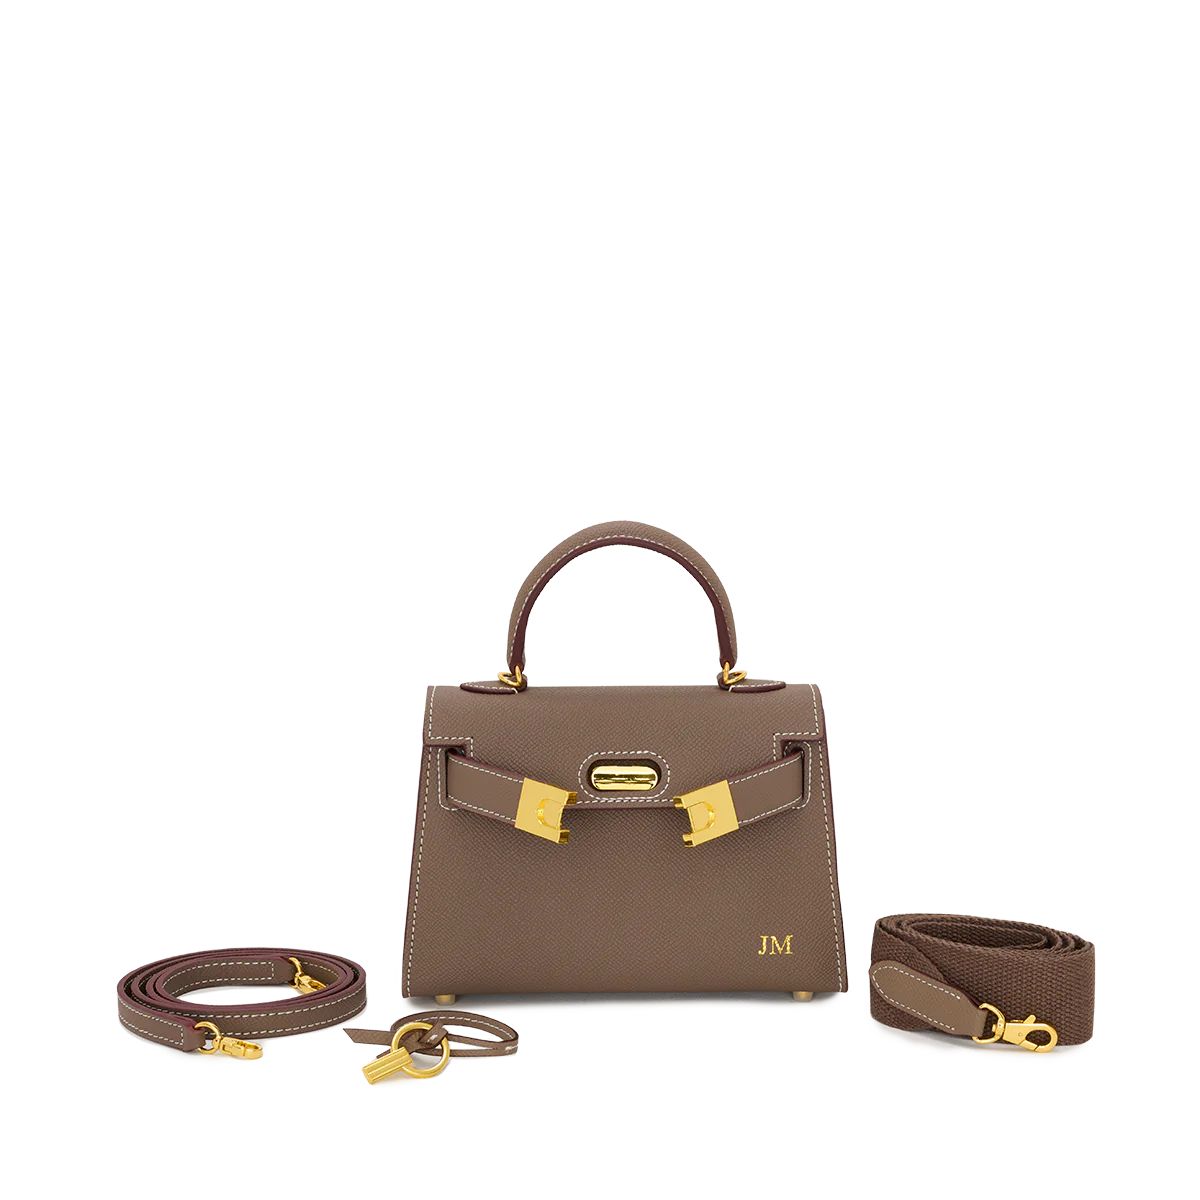 Lily and Bean Evie Leather Bag Mocha PRE ORDER 3 WEEKS | Lily and Bean